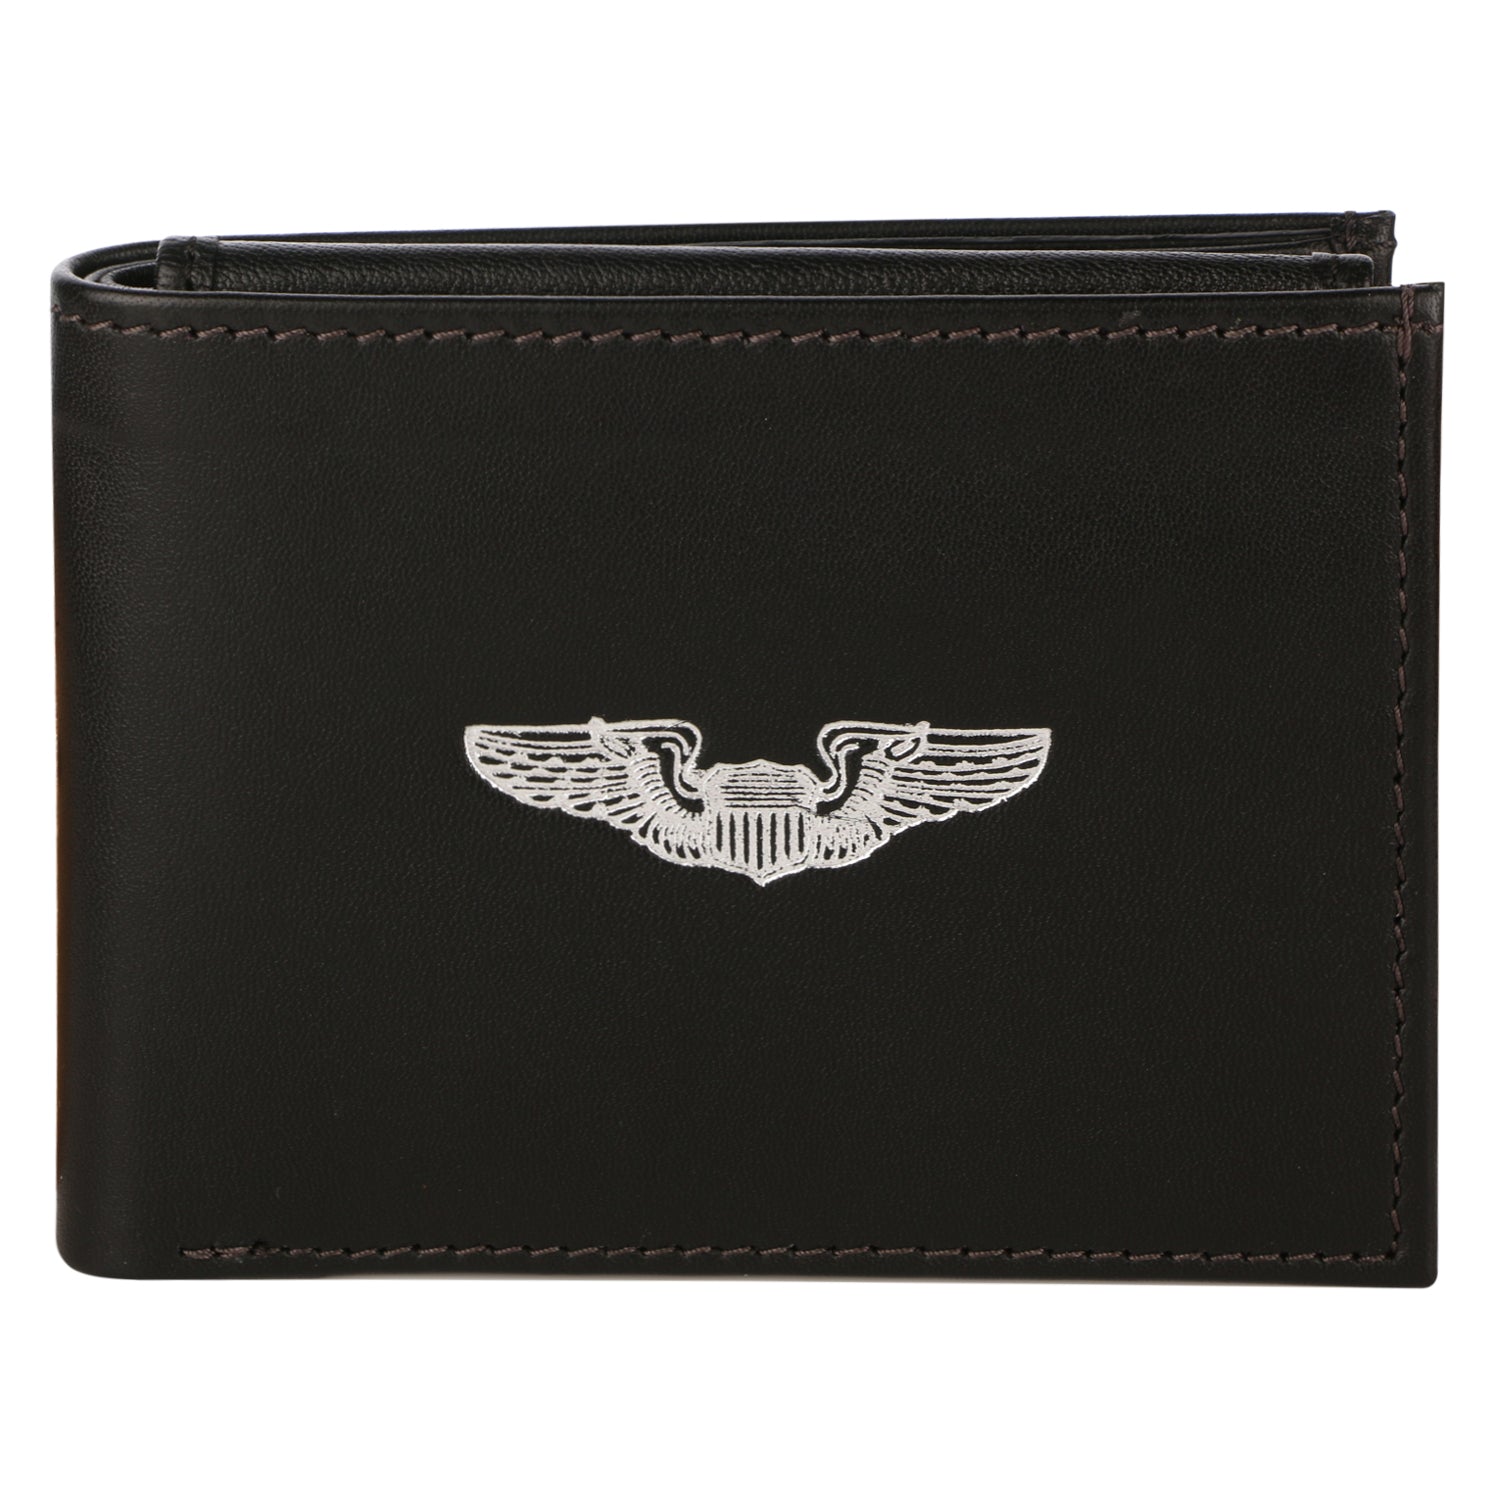 Front view of FRED HESS MENS WALLET